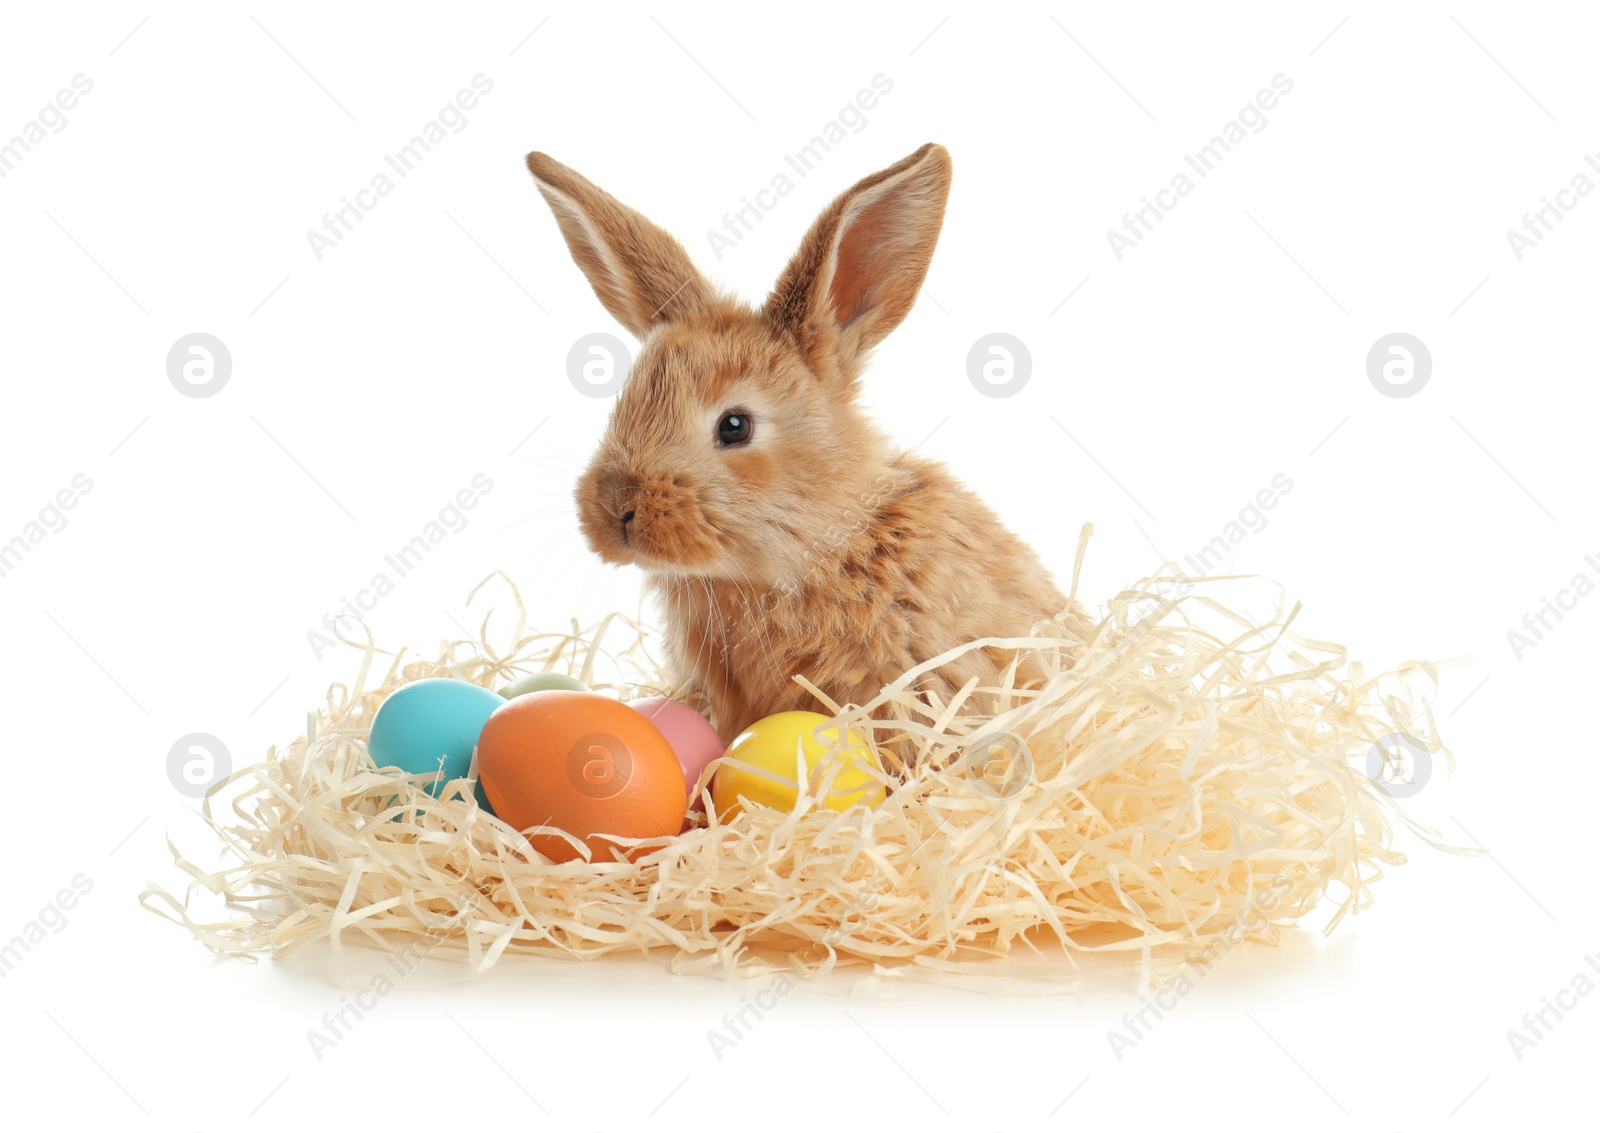 Photo of Adorable furry Easter bunny with decorative straw and dyed eggs on white background